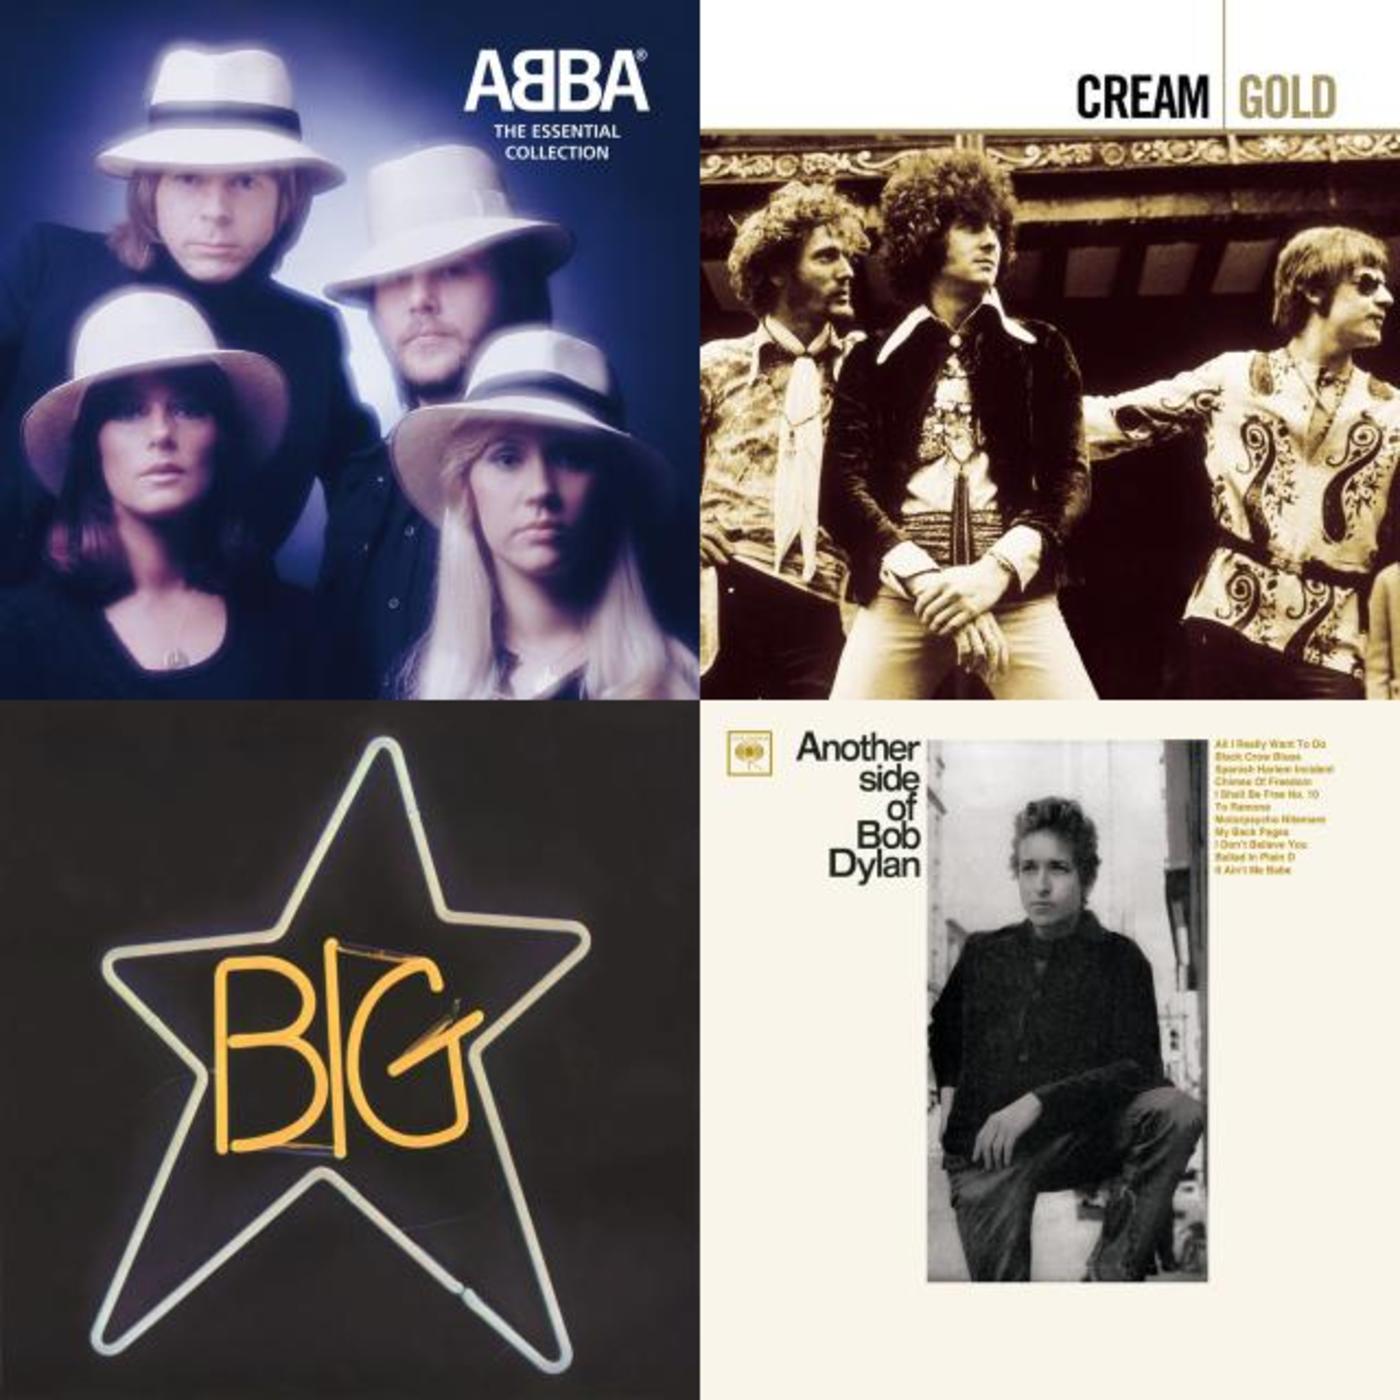 Songs With The Title Not In The Lyrics - Cream, Big Star, Bob Dylan, ABBA, Cat Stevens, Bee Gees, The Monkees, Elton John, The Who, Led Zeppelin